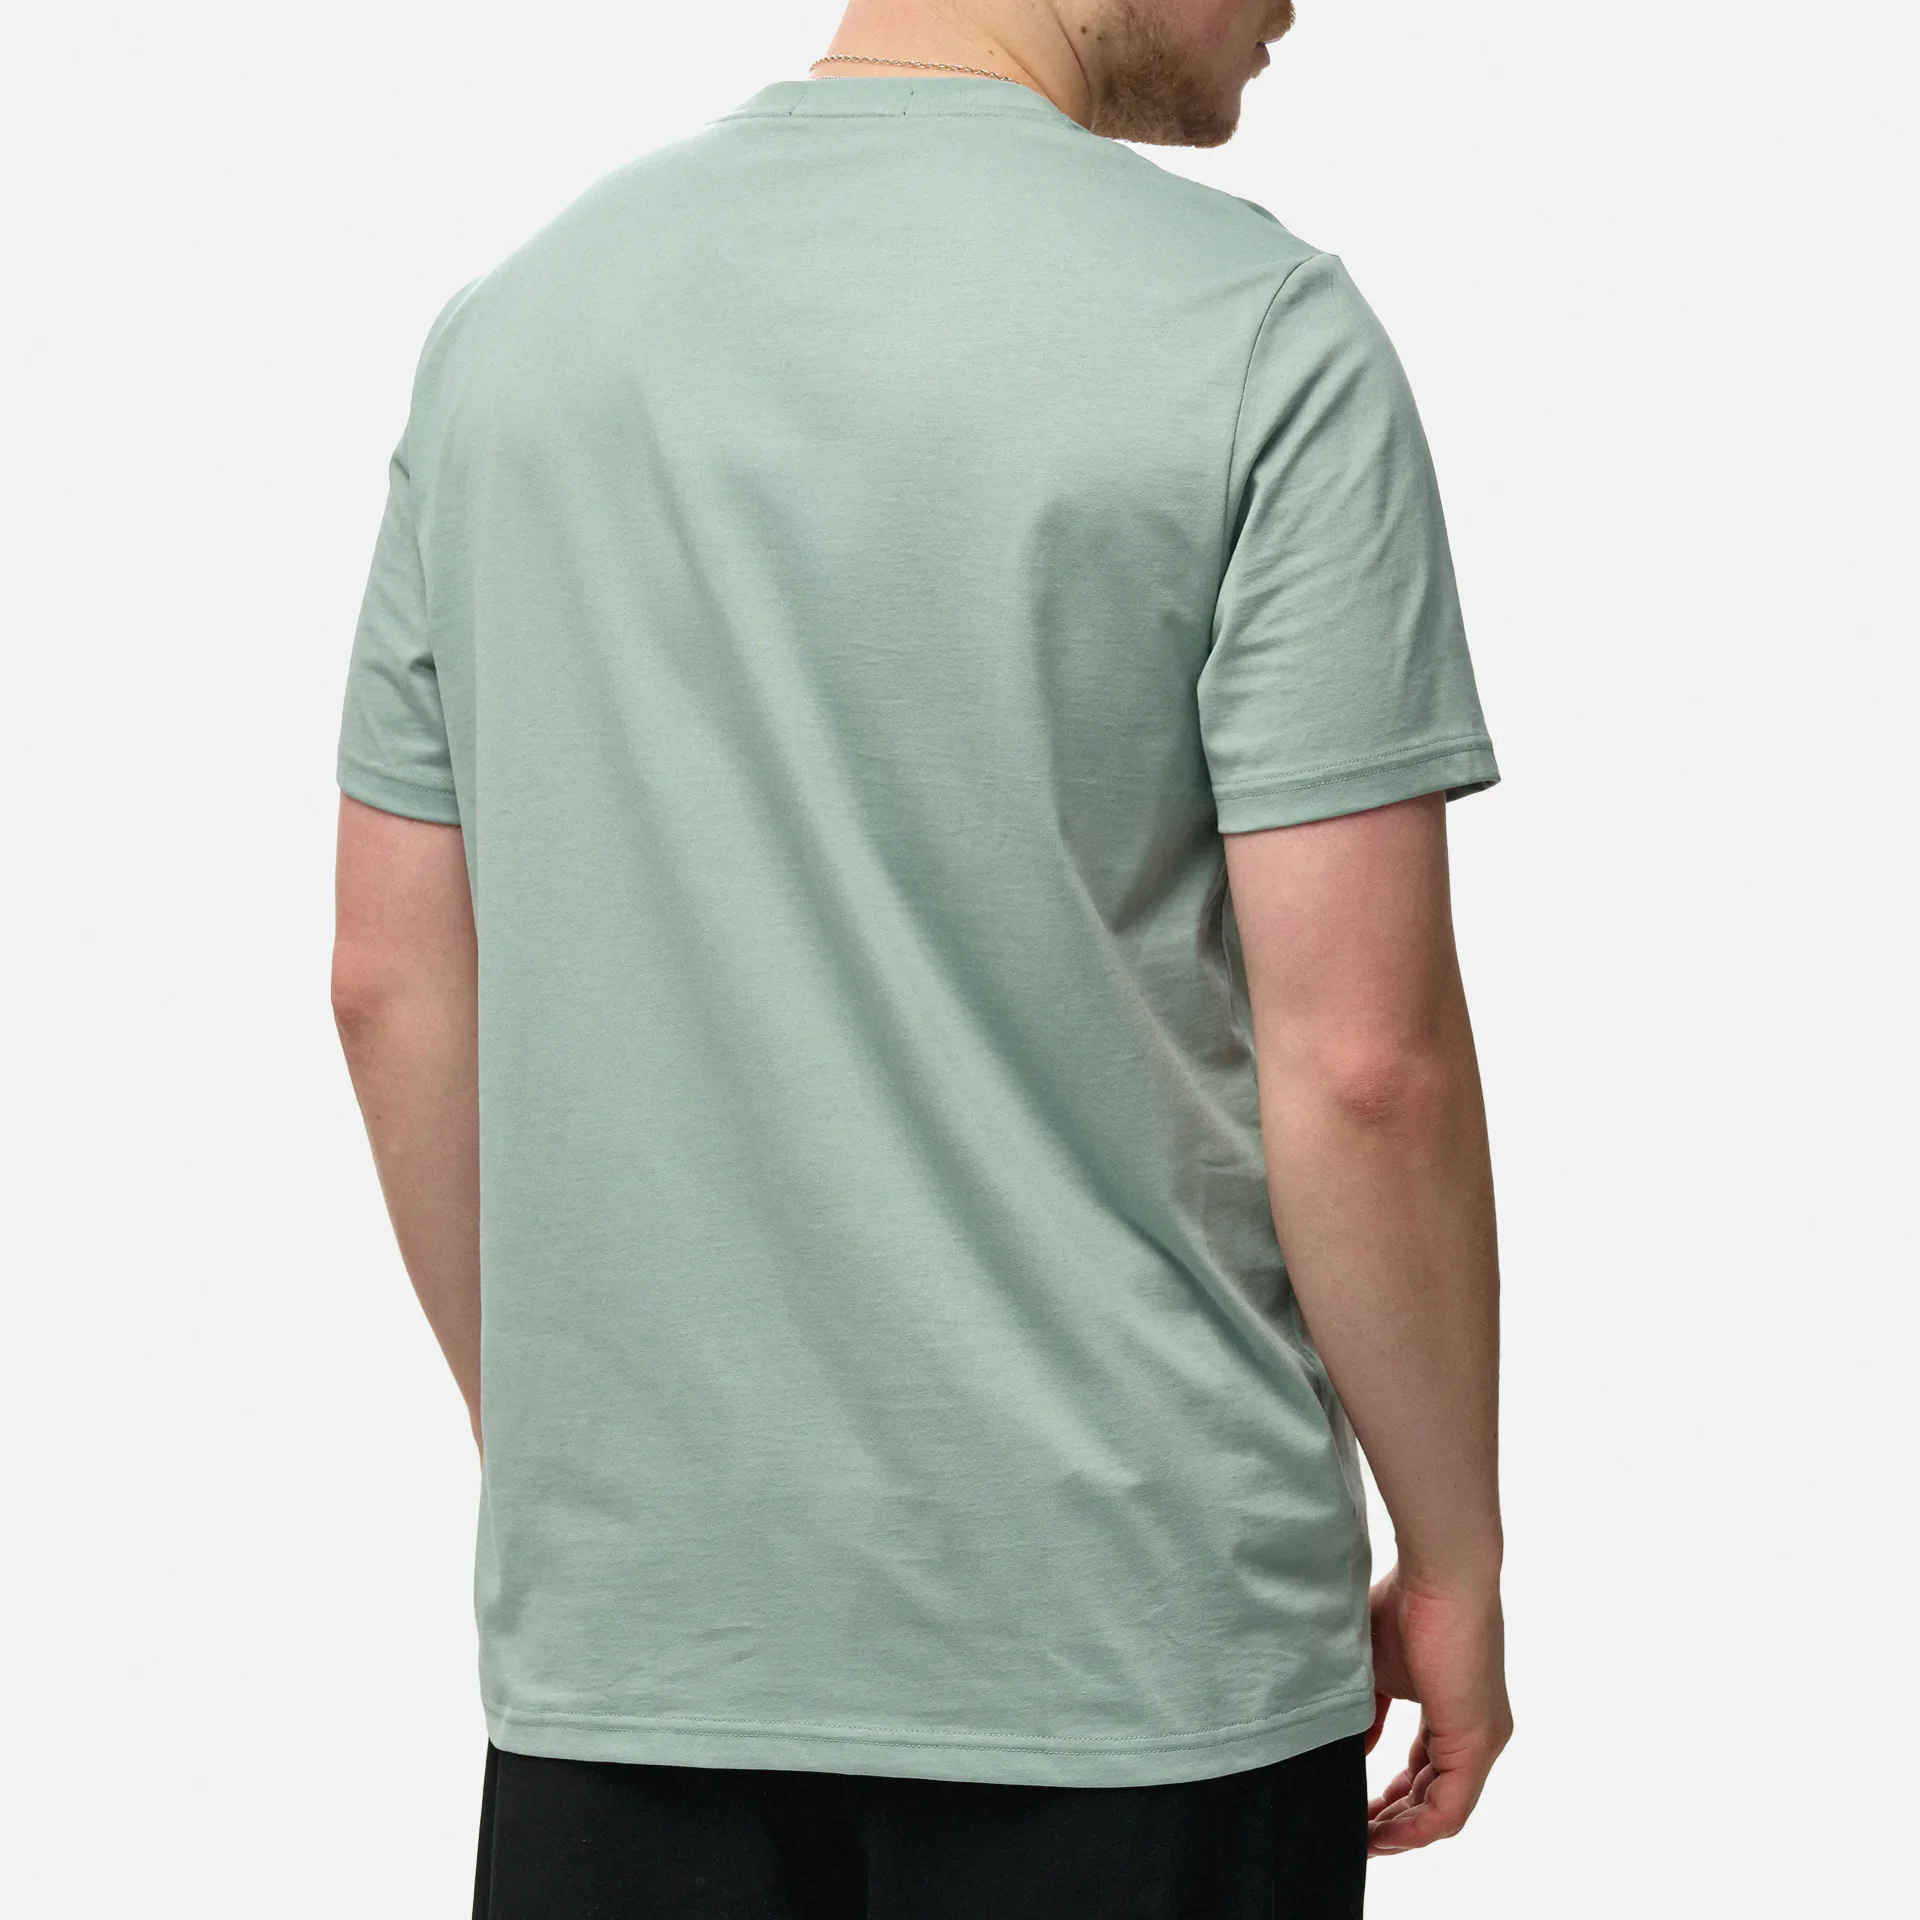 Fred Perry Embroidered T-Shirt Silver Grey